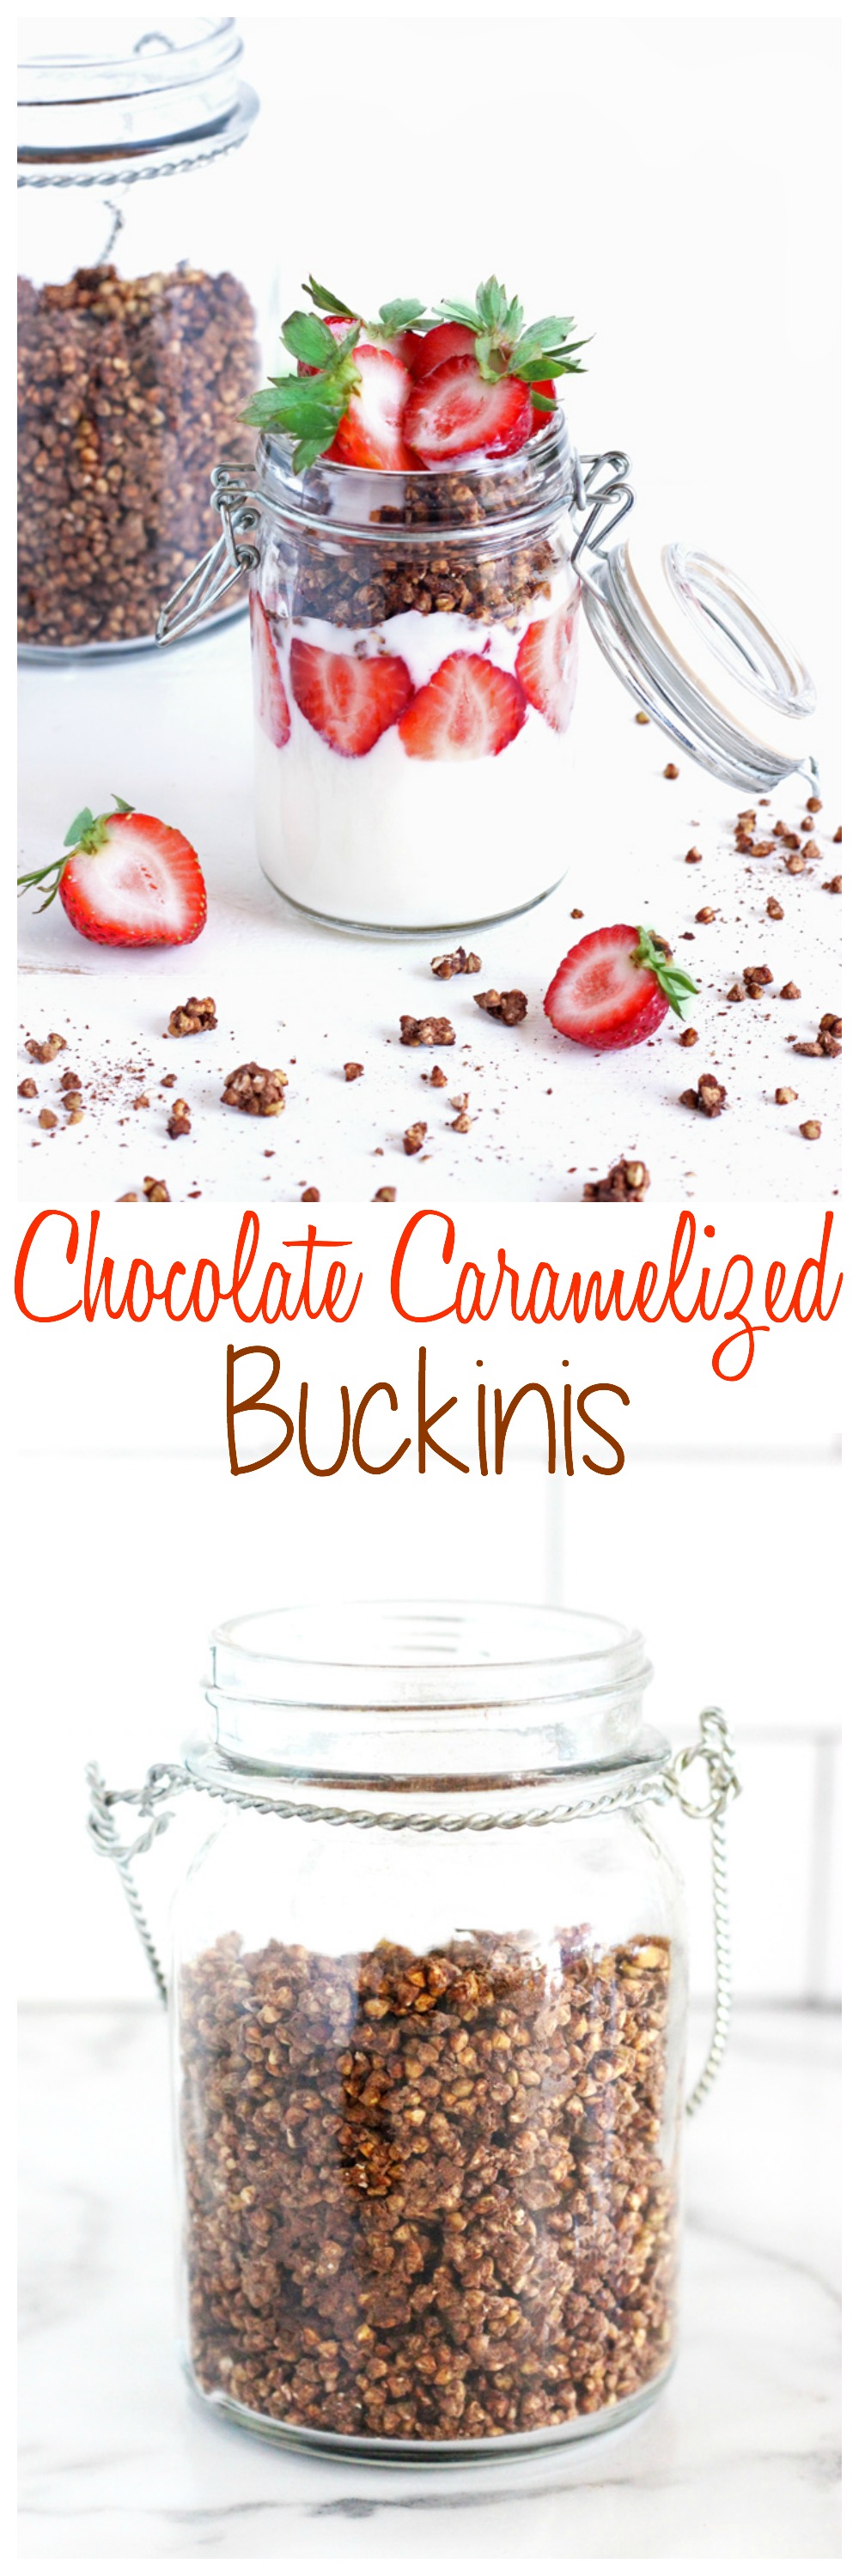 Activated Chocolate Caramelized Buckinis. The perfect snack that's high in antioxidants, all essential amino acids, and a great way to get your daily dose of fiber. Enjoy this crunchy delight with your favorite morning cup of non dairy yogurt! NeuroticMommy.com #vegan #health #glutenfree